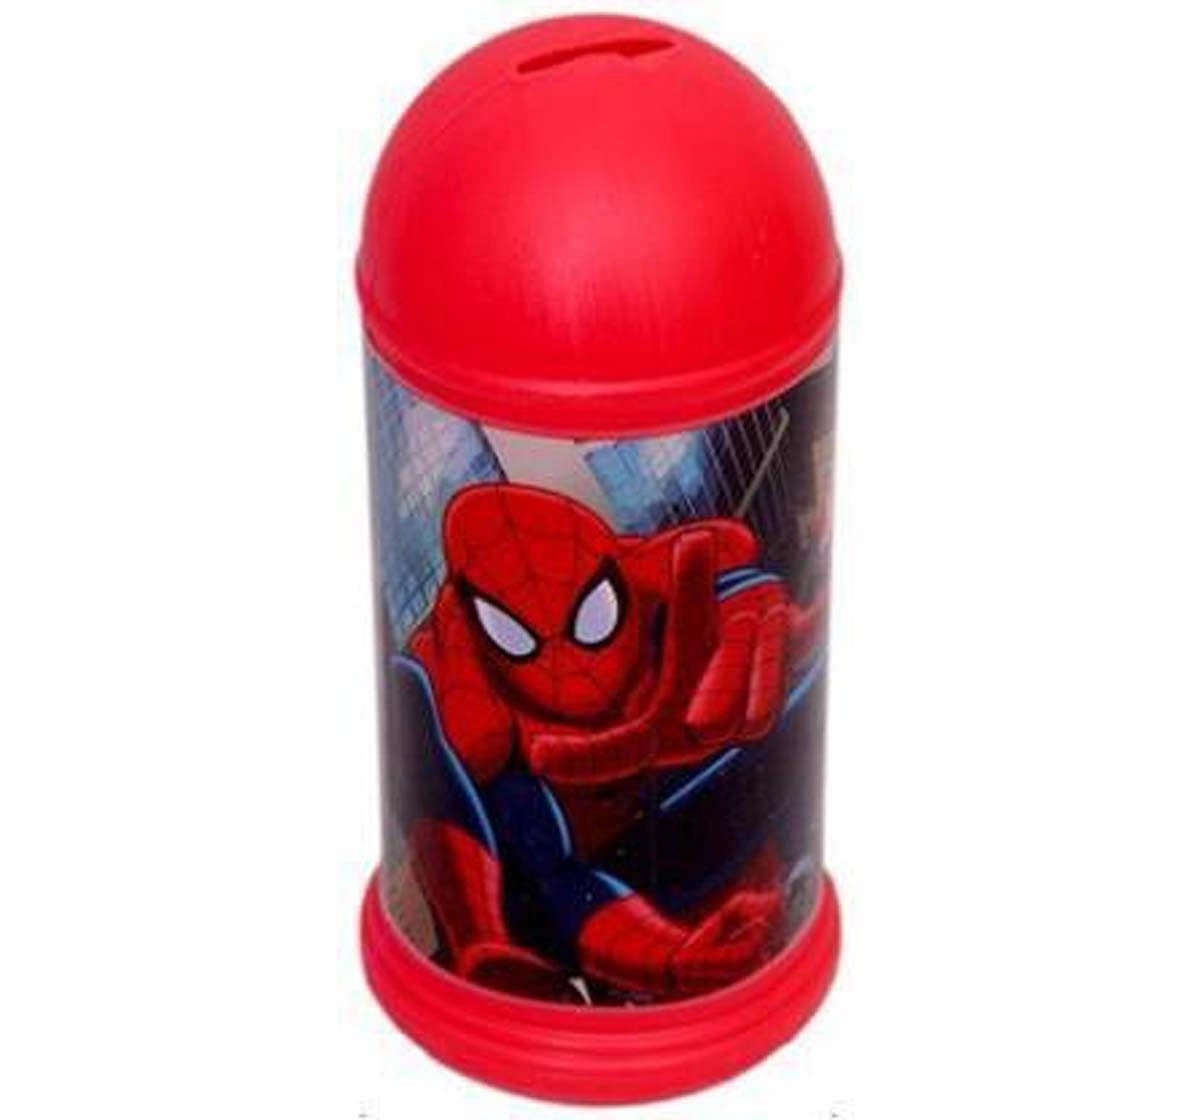 IToys Marvel Spidrman Coin Bank Novelty for Kids Age 4Y+